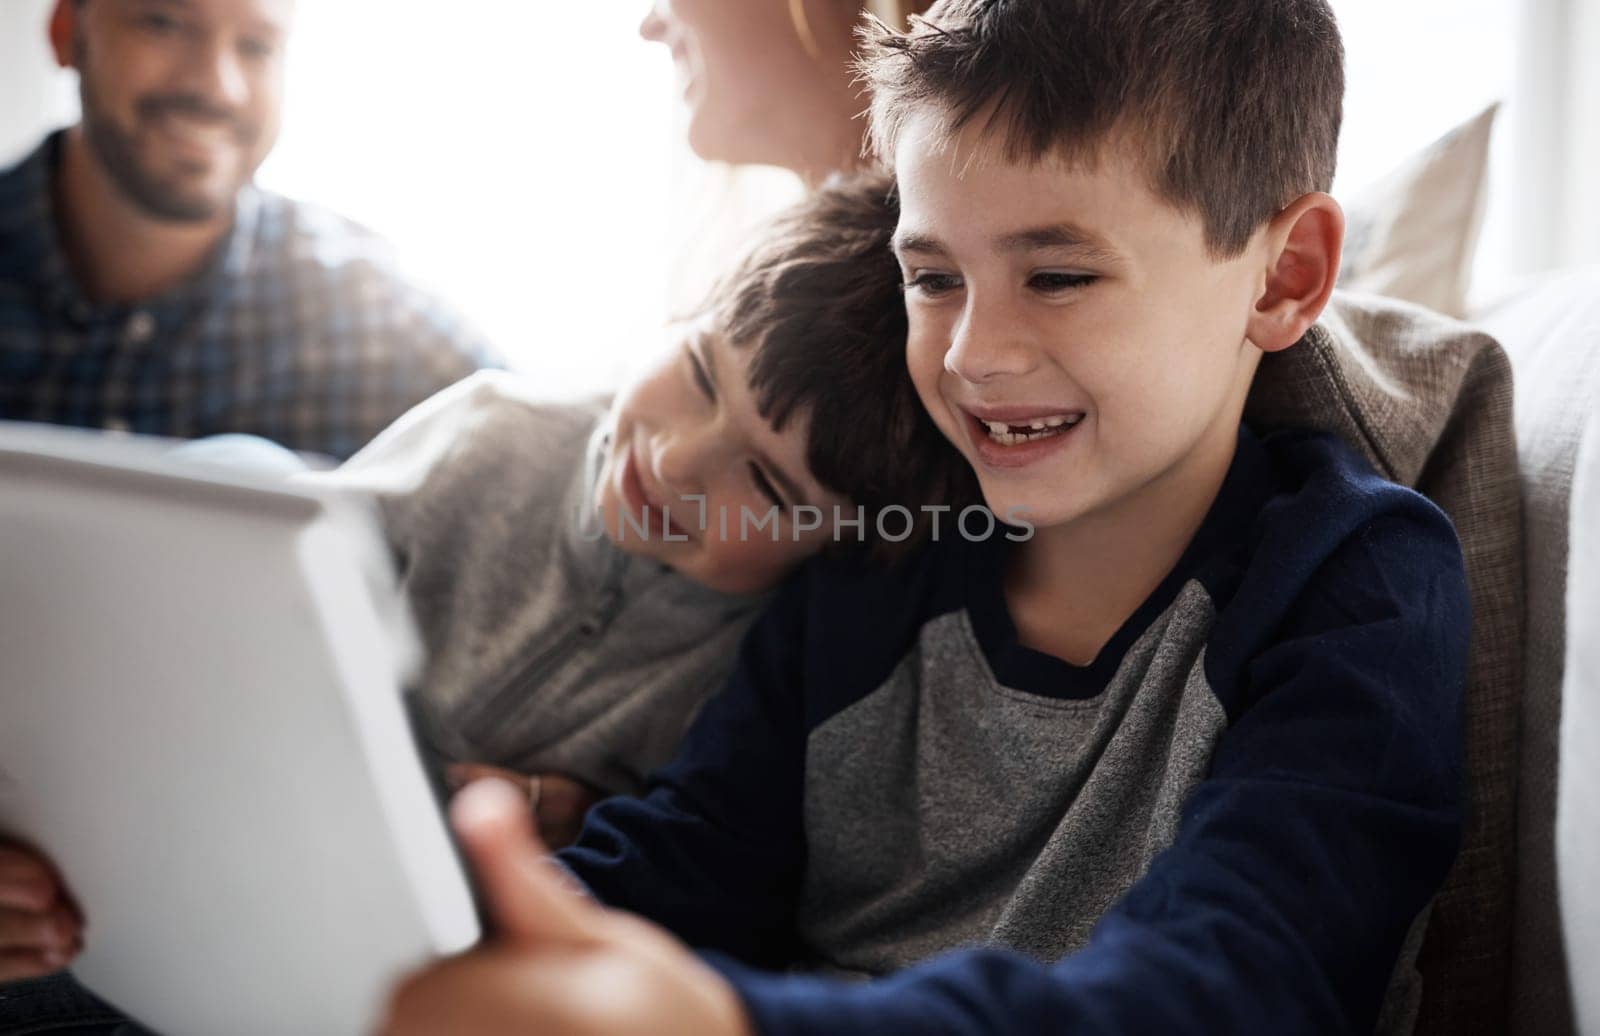 Laughing kids, bonding or tablet for movies streaming, esports or social media on house or family home living room. Smile, happy or fun brother on digital technology, children learning or team gaming.